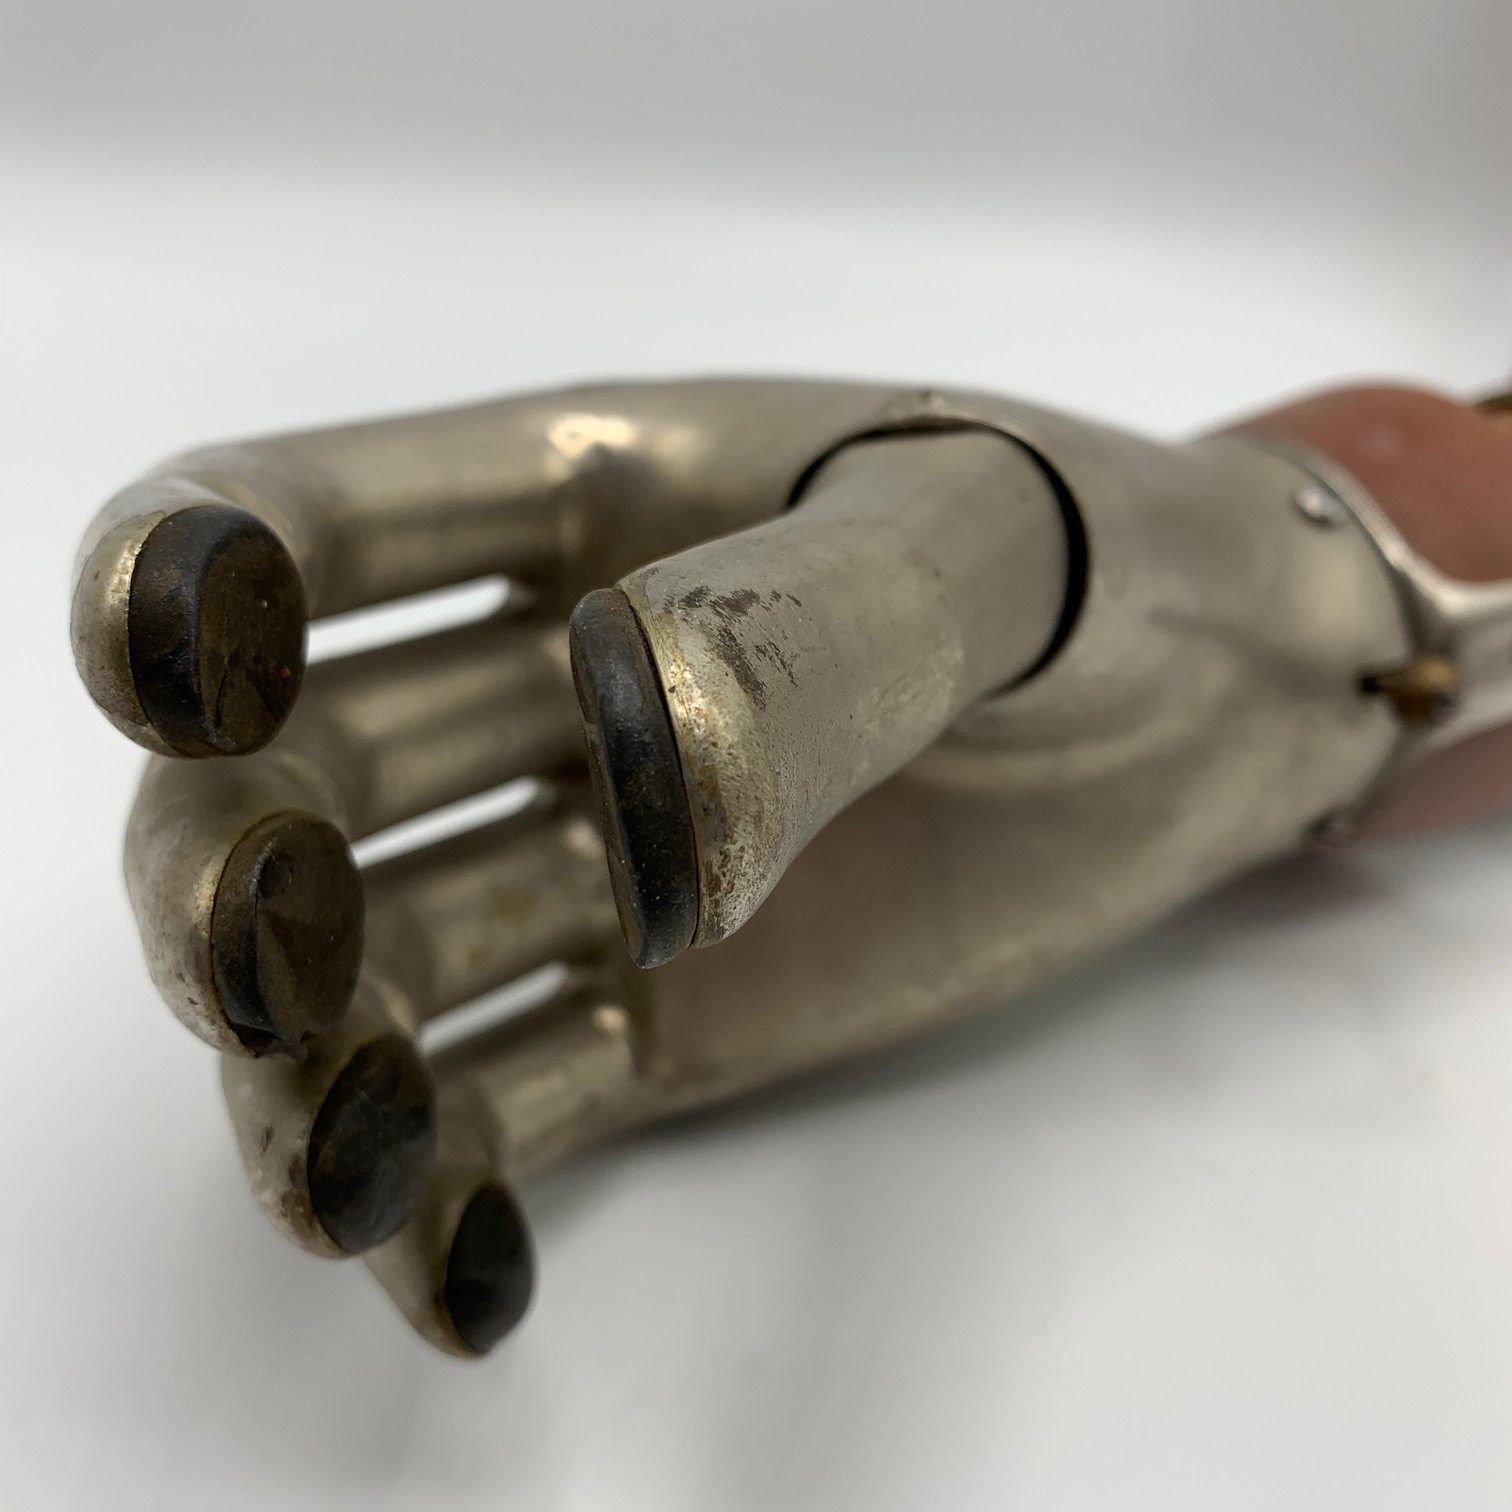 A rare Austrian prosthetic arm with metal hand, marked